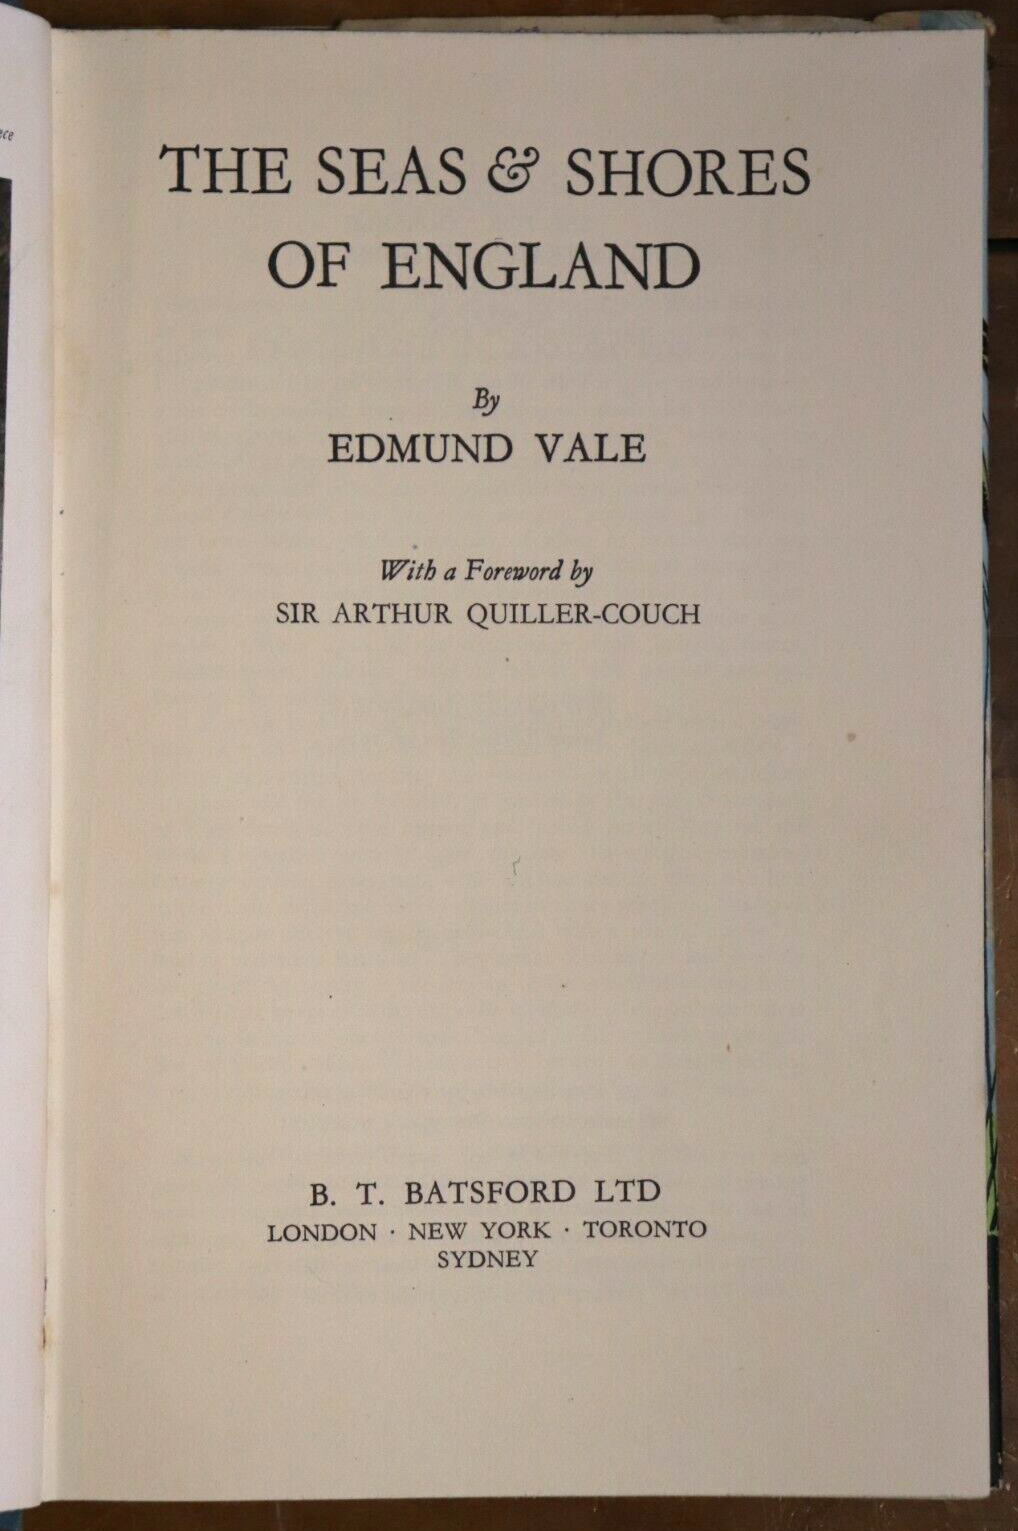 The Seas & Shores Of England by Edmund Vale - 1950 - British History Book - 0